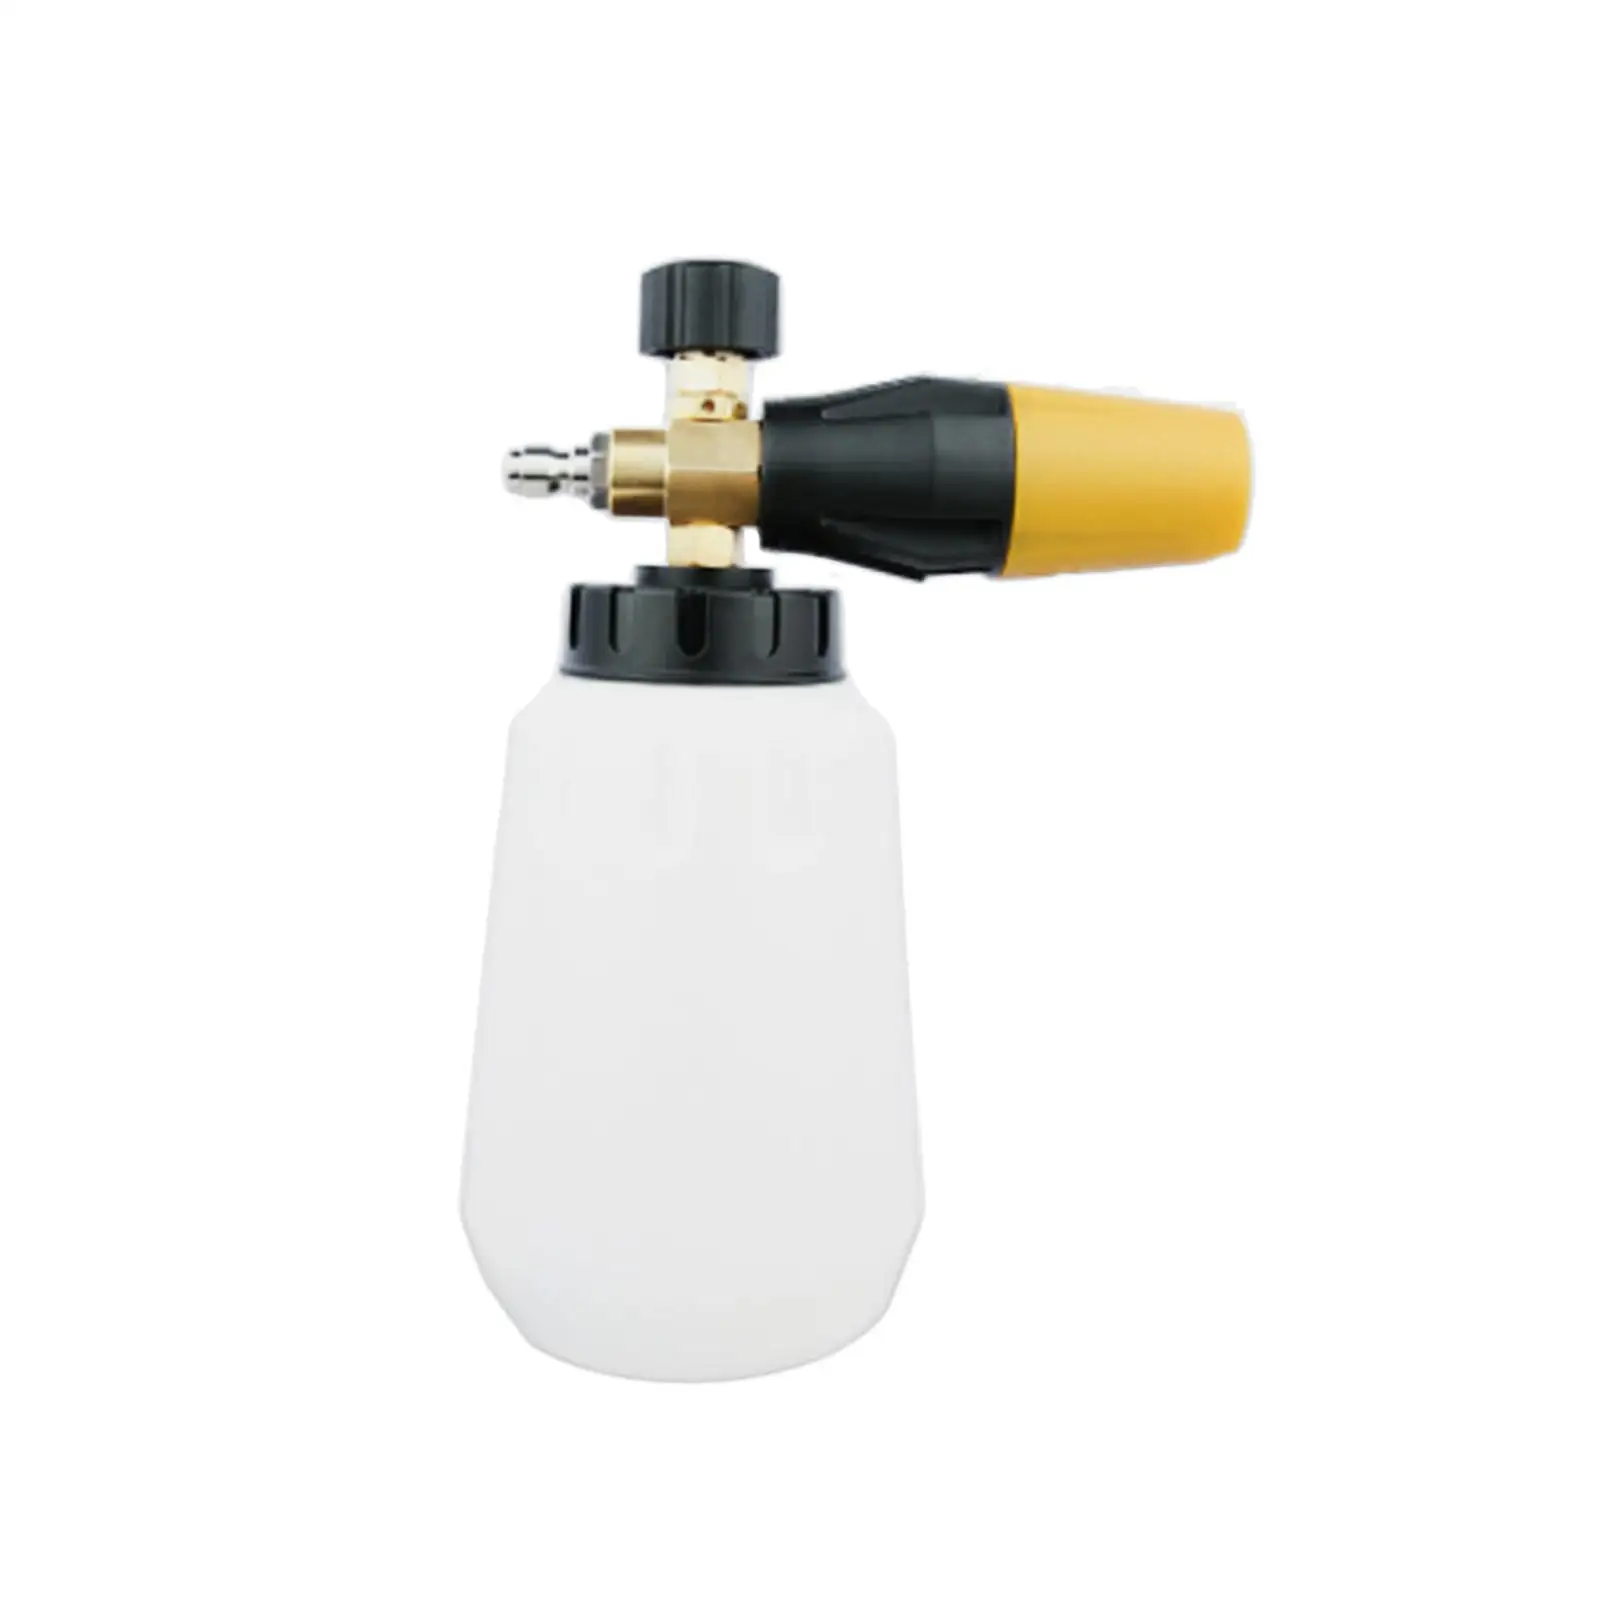  er, Foam Cars Watering Washing Tool Water Bottle High Pressure Cleaner for Garden Use